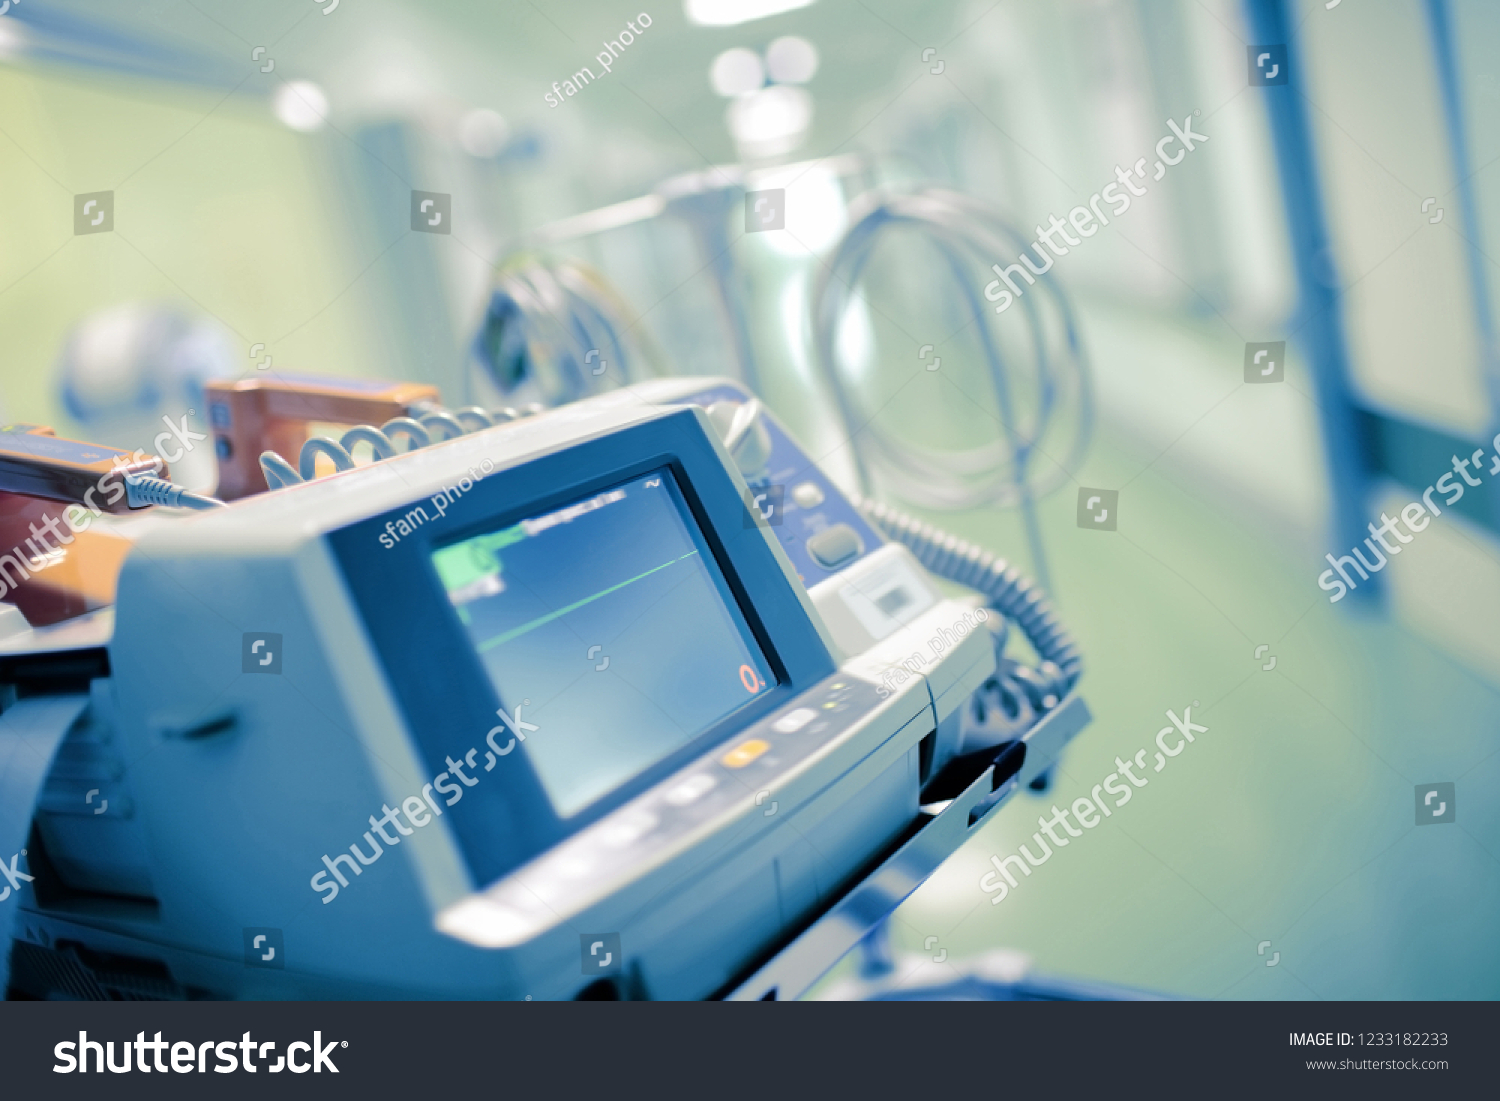 Medical monitor with the flatline on it as a concept of a patient clinical death. #1233182233